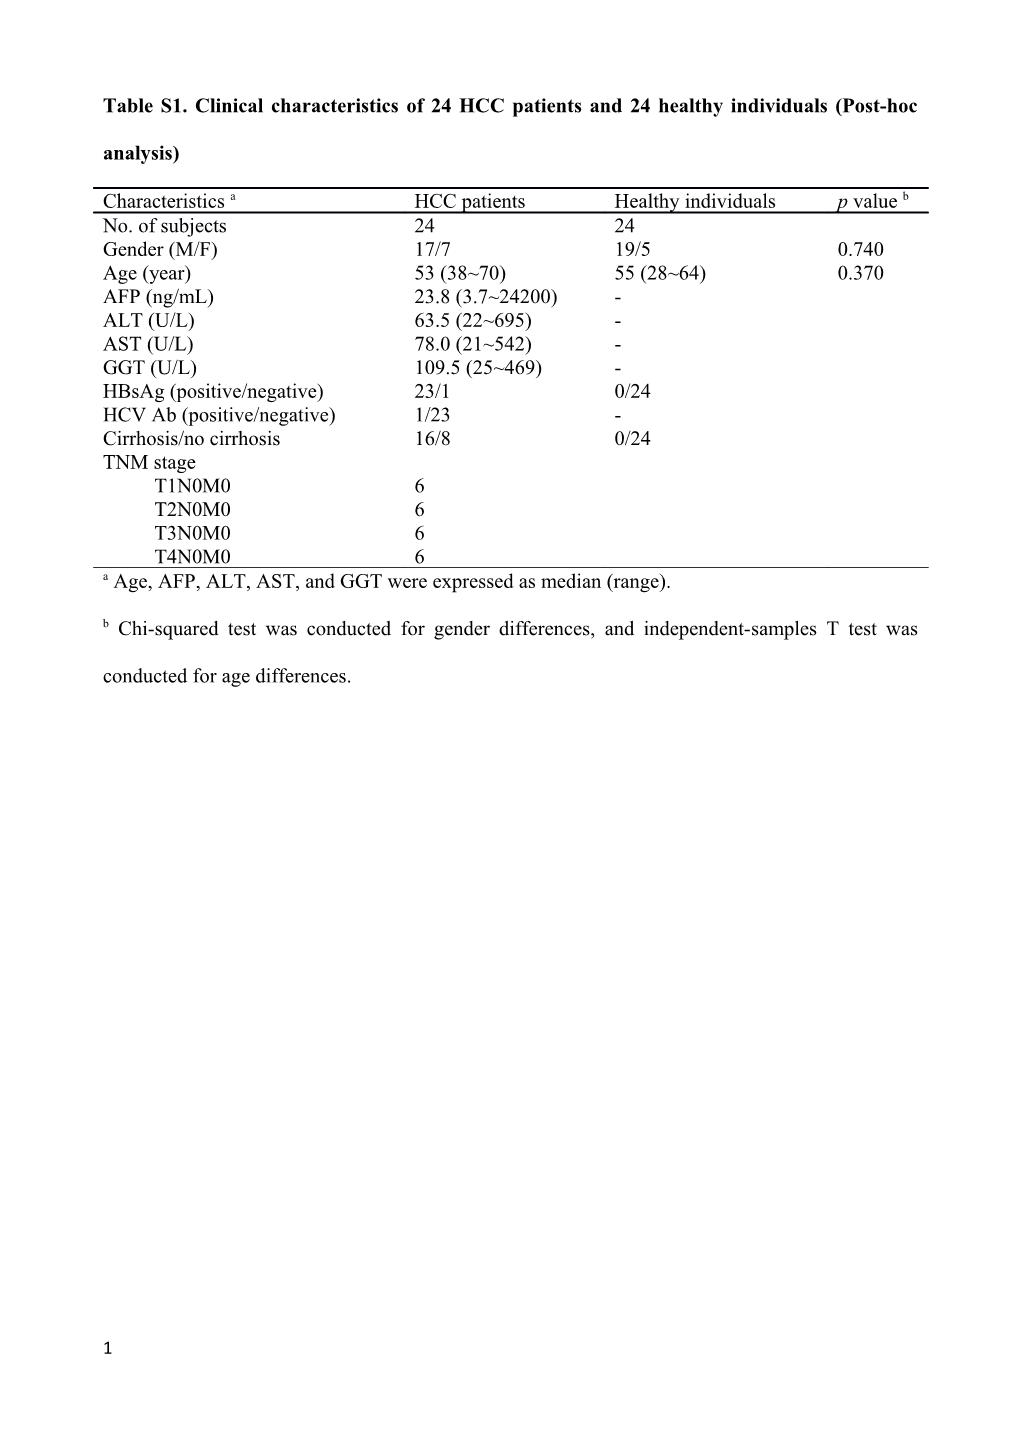 Table S1. Clinical Characteristics of 24 HCC Patients and 24 Healthy Individuals(Post-Hoc